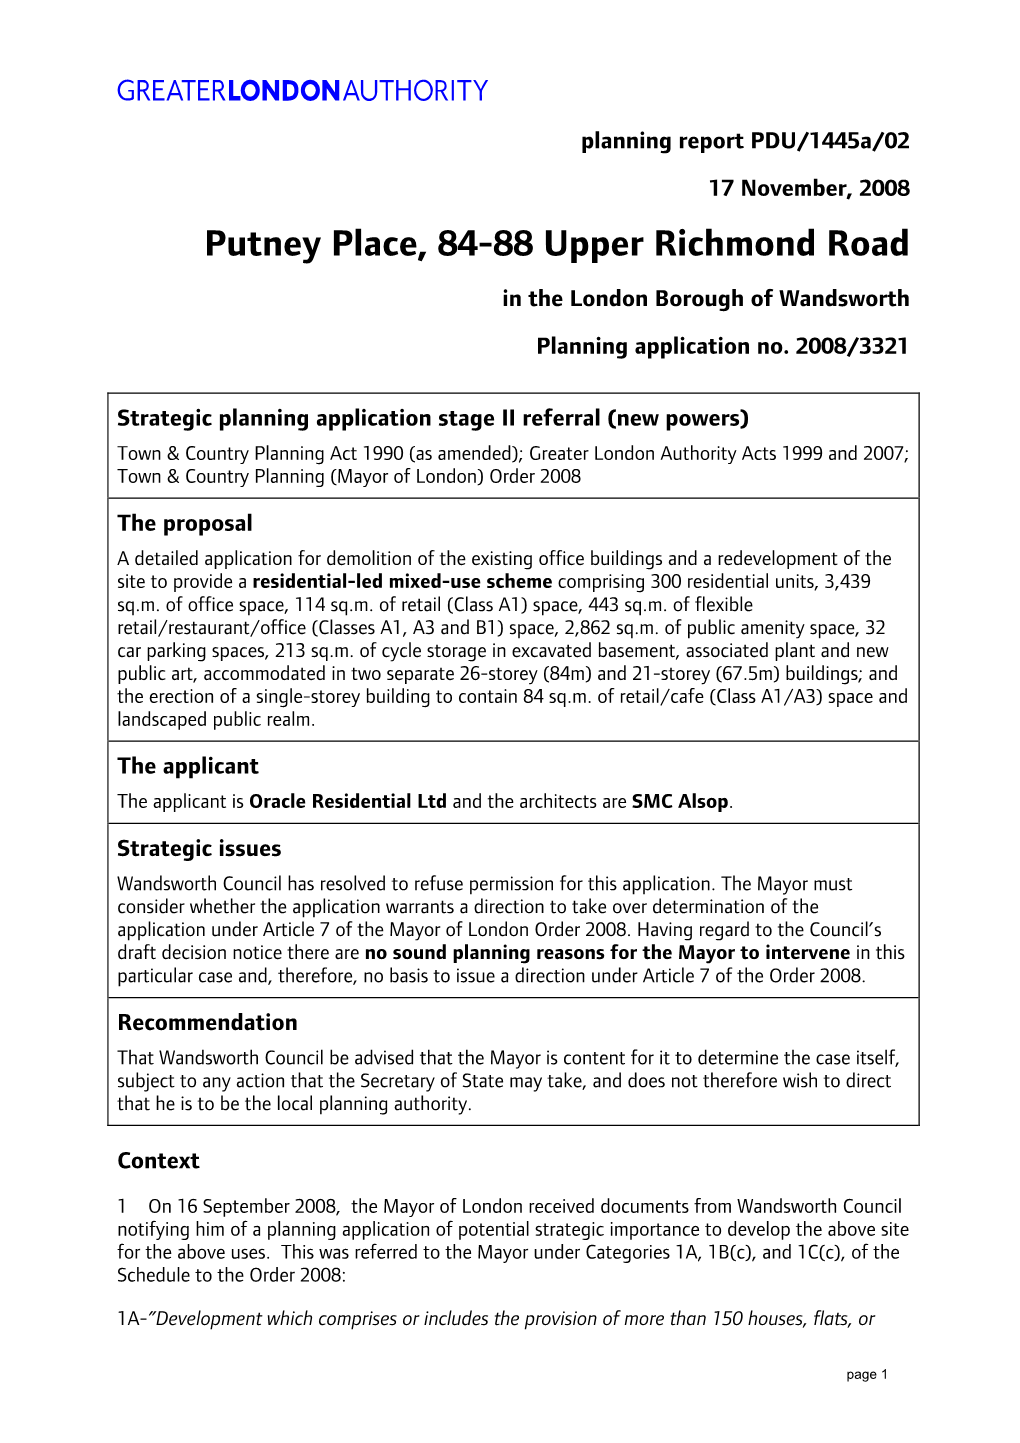 Putney Place, 84-88 Upper Richmond Road in the London Borough of Wandsworth Planning Application No